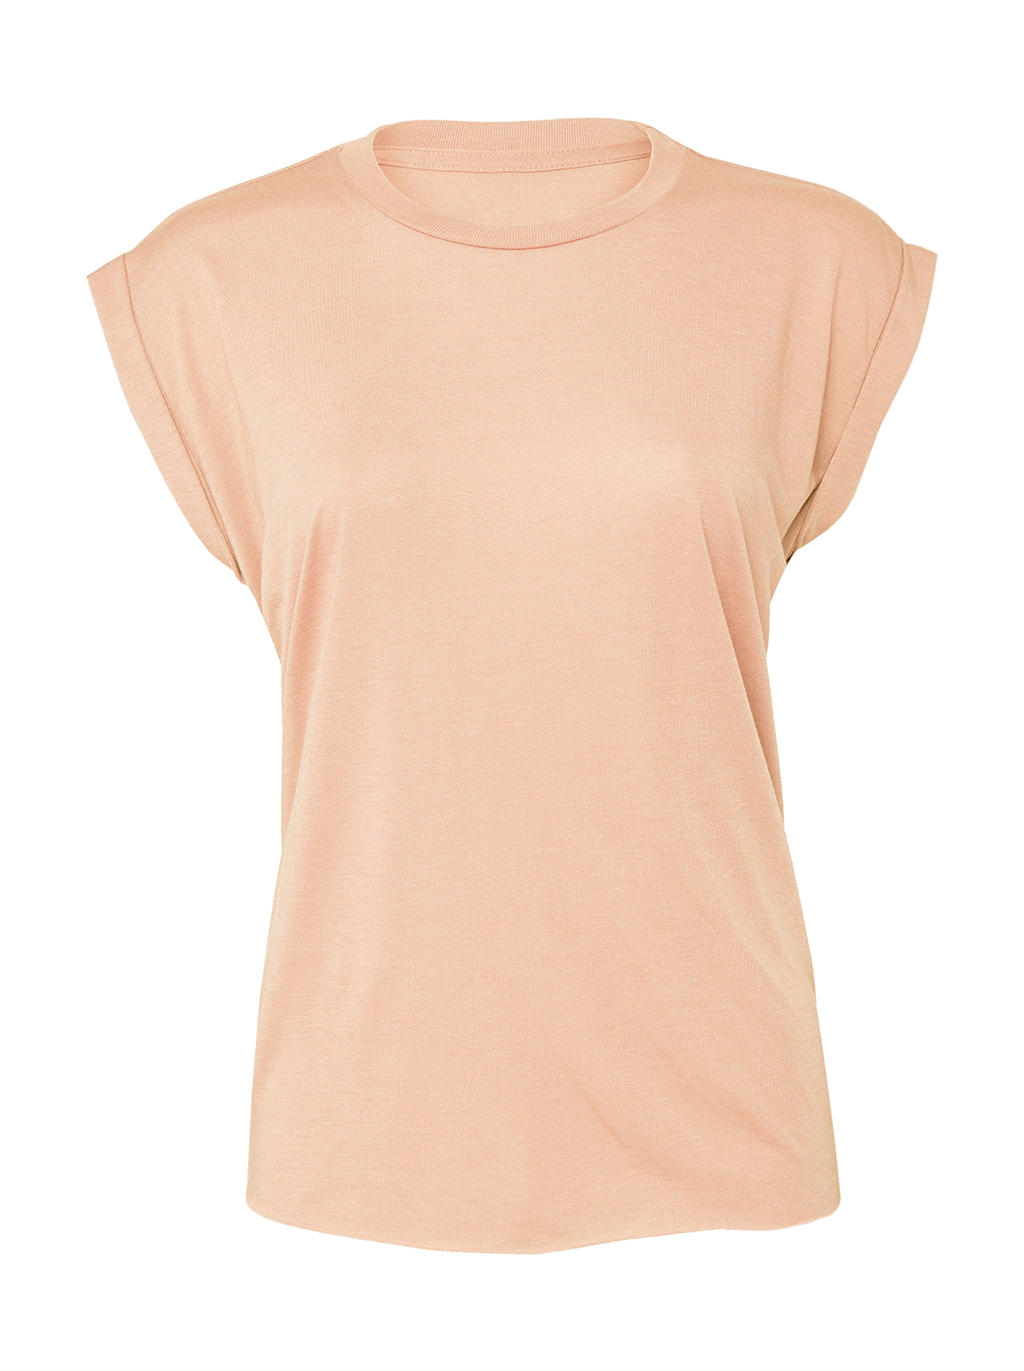  Womens Flowy Muscle Tee Rolled Cuff in Farbe Peach